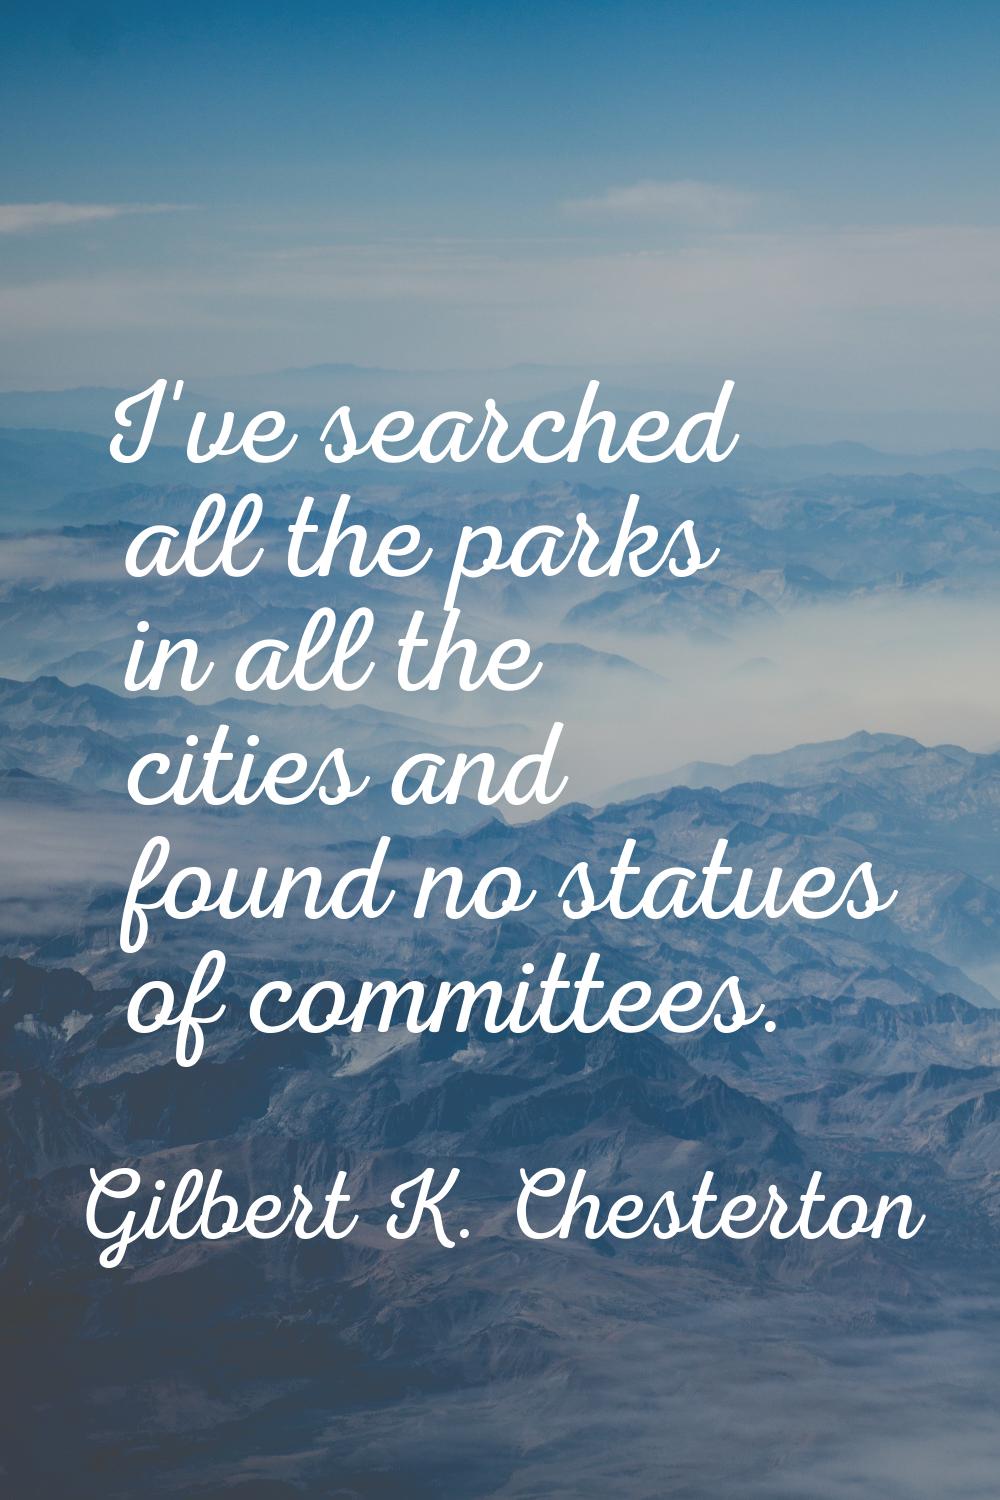 I've searched all the parks in all the cities and found no statues of committees.